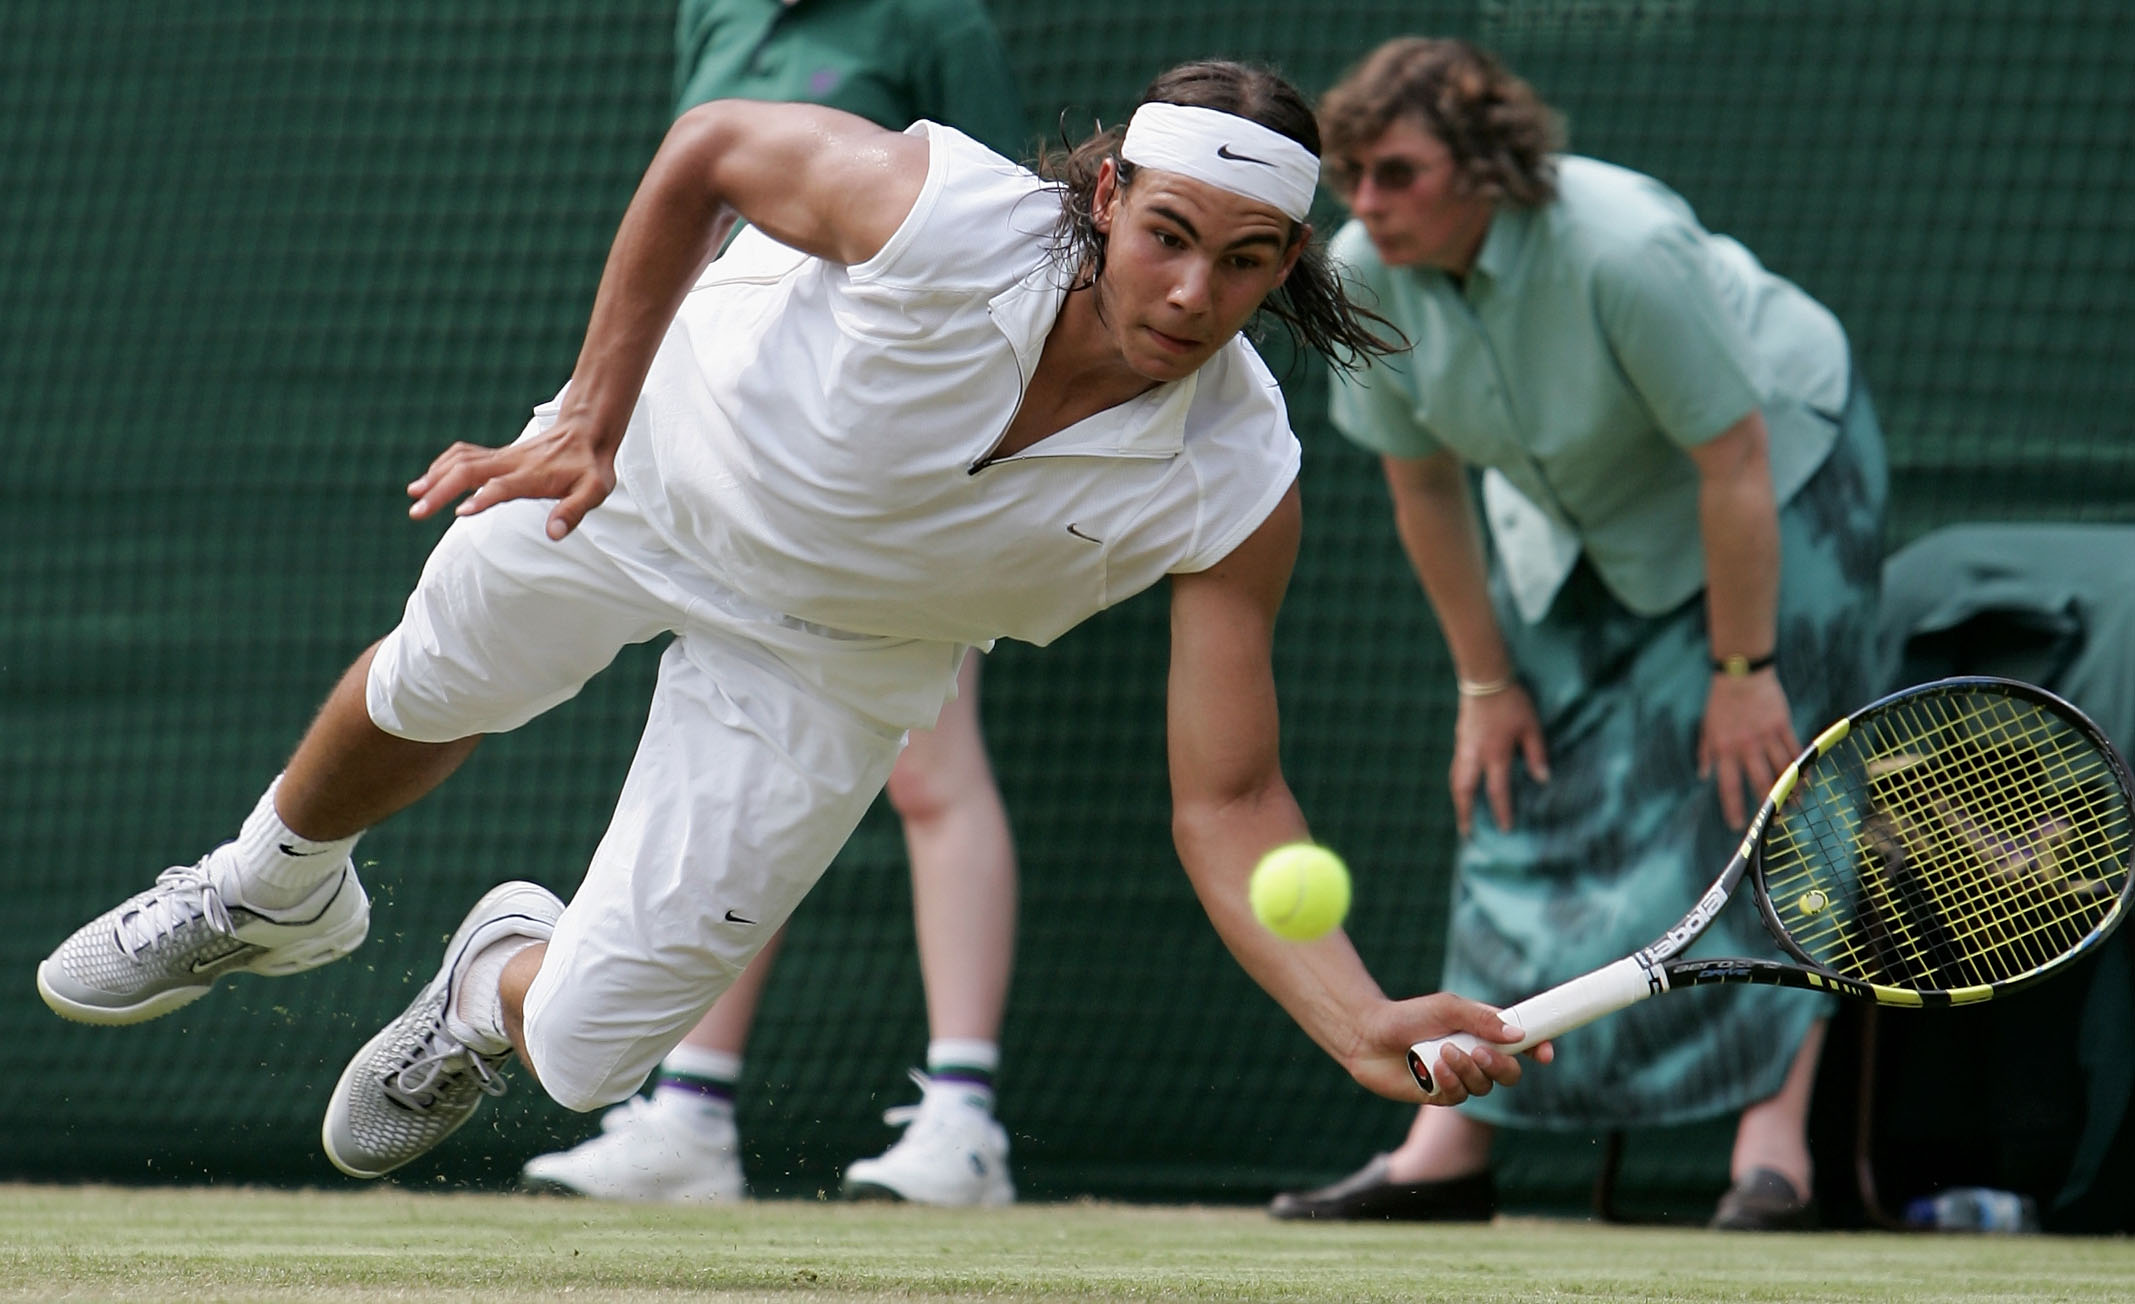 LONDON - JUNE 23:  Rafael Nadal of Spain dives for the ball against Gilles Muller of Luxembourg during the fourth day of the Wimbledon Lawn Tennis Championship on June 23, 2005 at the All England Lawn Tennis and Croquet Club in London.  (Photo by Phil Col